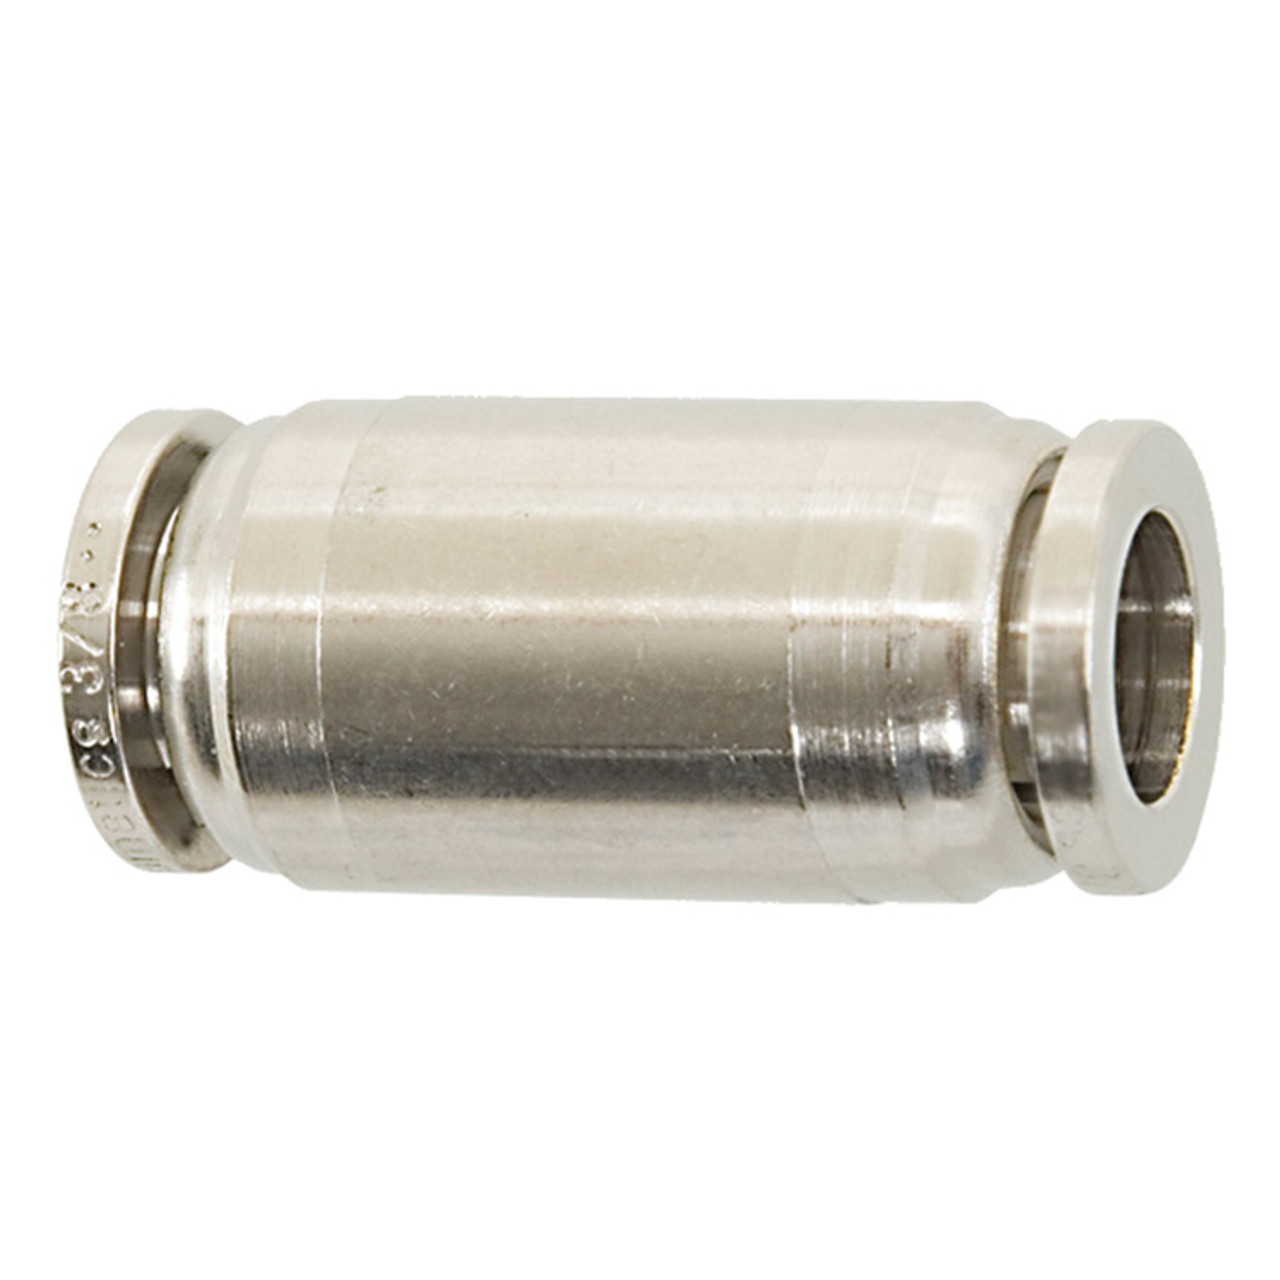 3/16" Nickel Plated Brass Push-To-Connect Union   G6060P-03-03